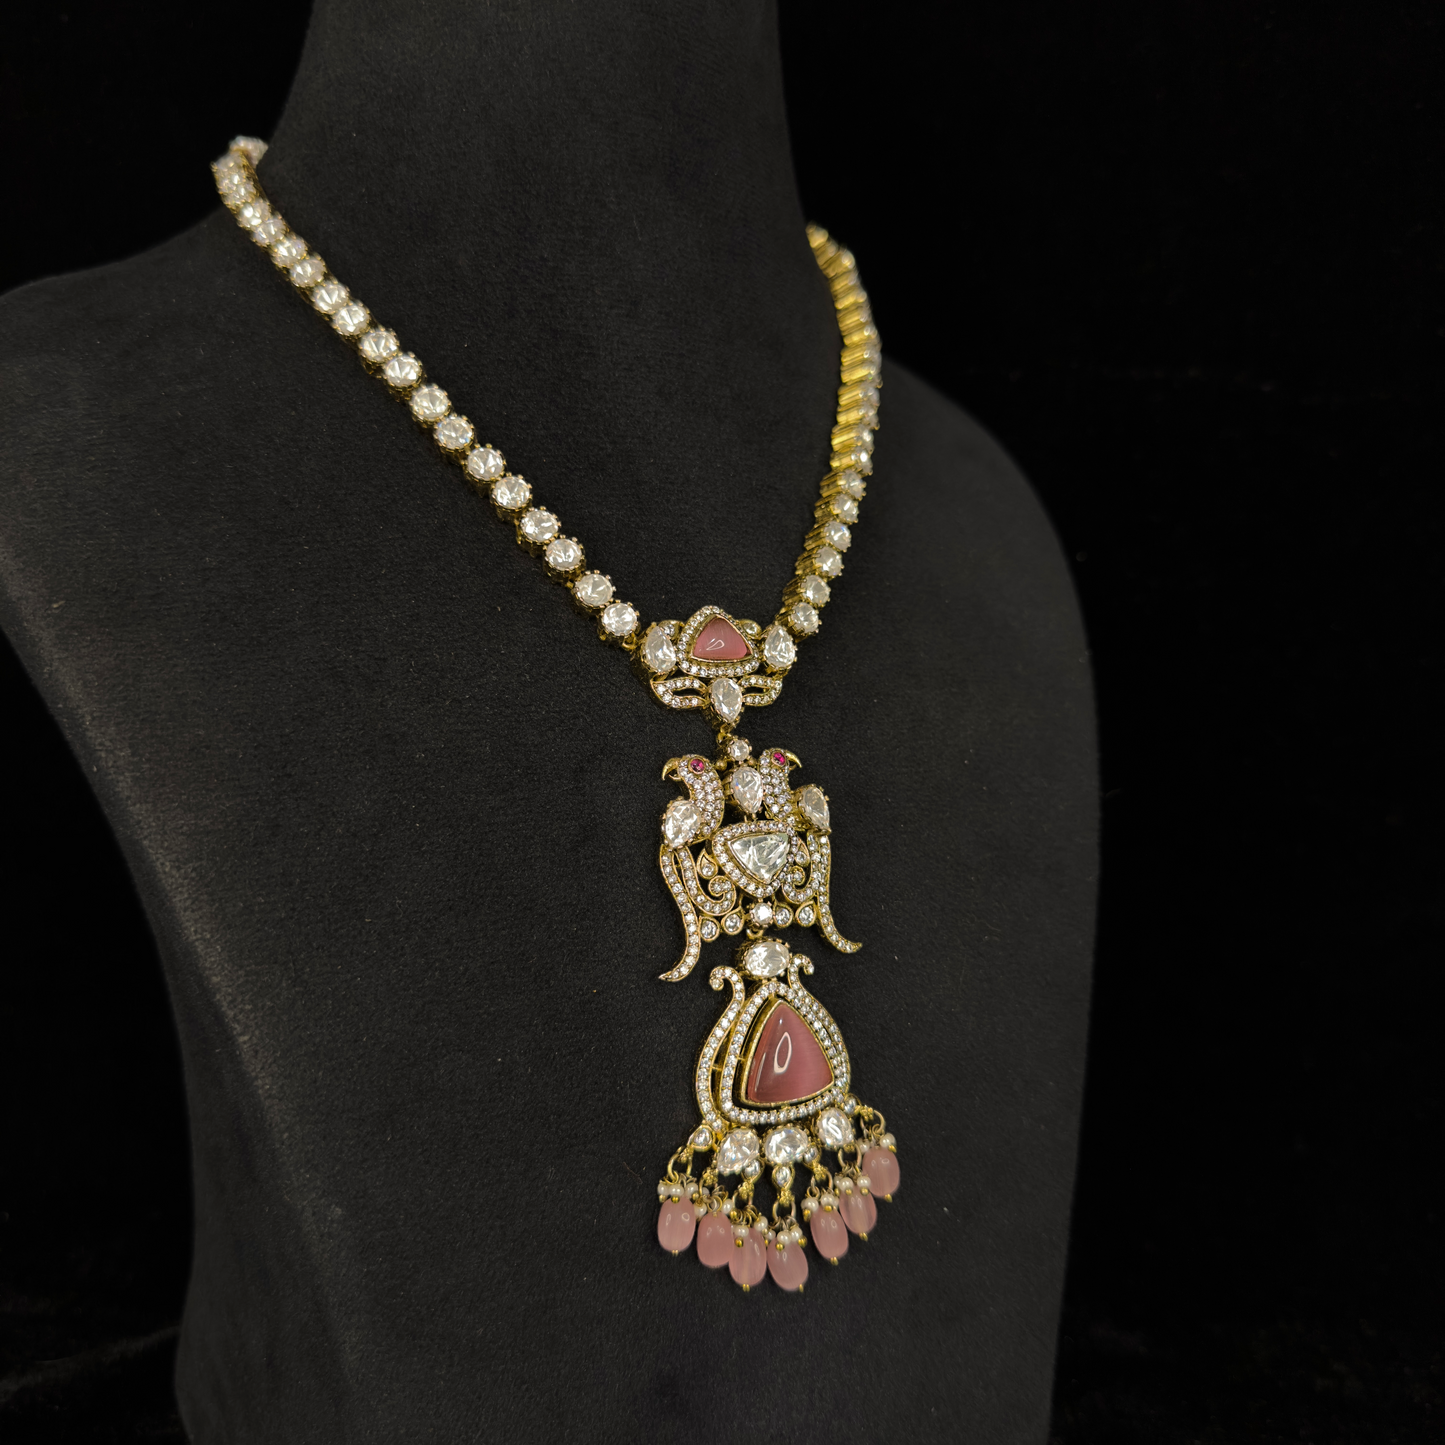 Exclusive Victorian Necklace Set with peacock motifs